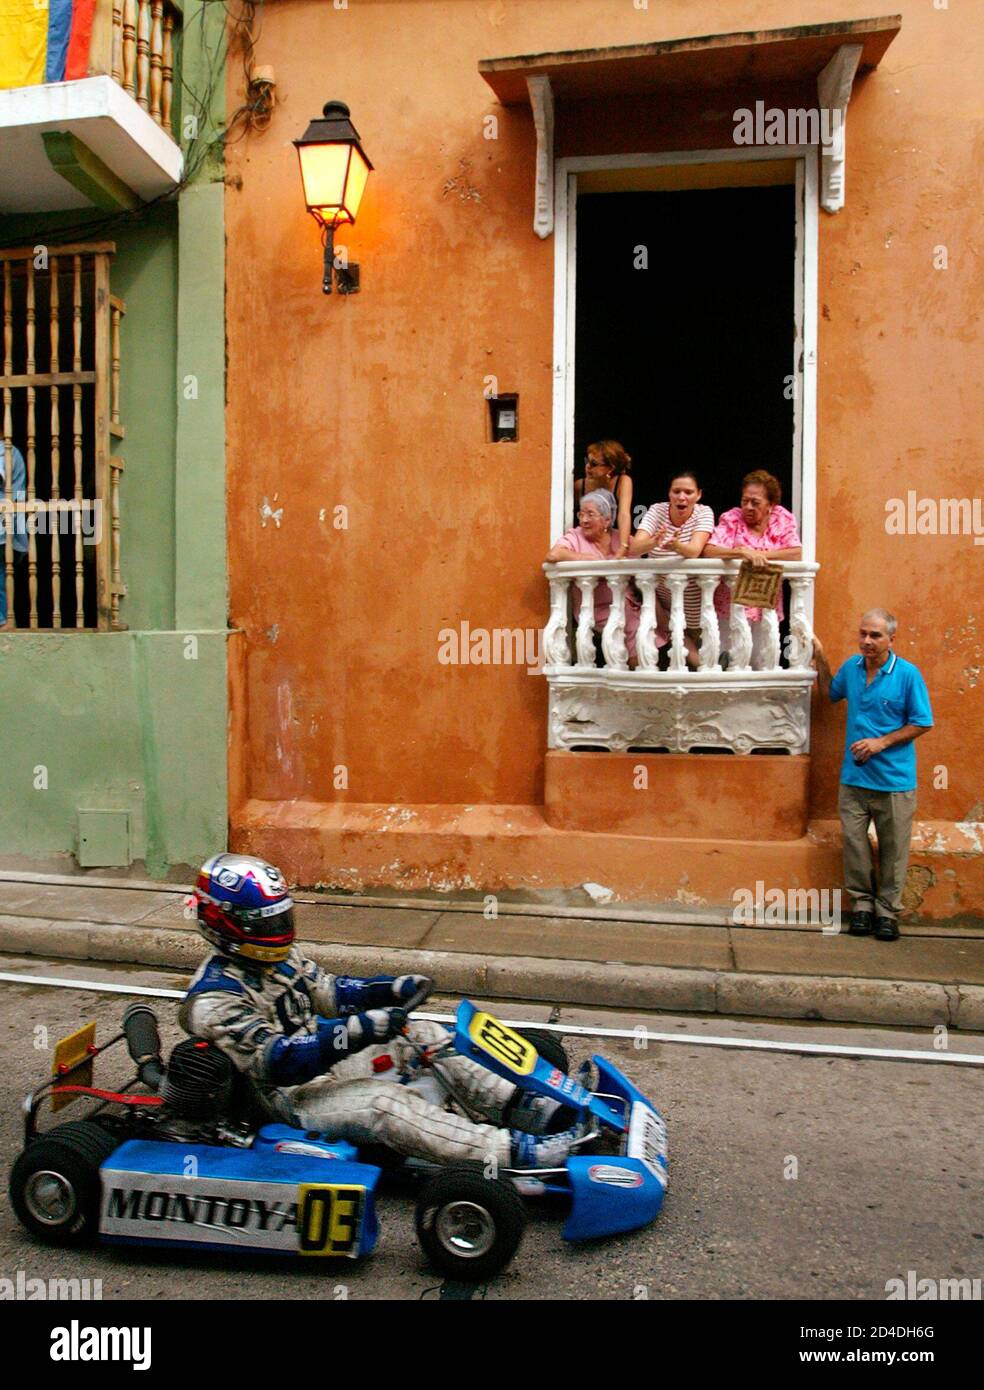 Colombia's Formula One driver Juan Pablo Montoya drives his cart on an  historic street during an exhibition race in the Caribbean port city of  Cartagena, November 15, 2003. Drivers from the Formula